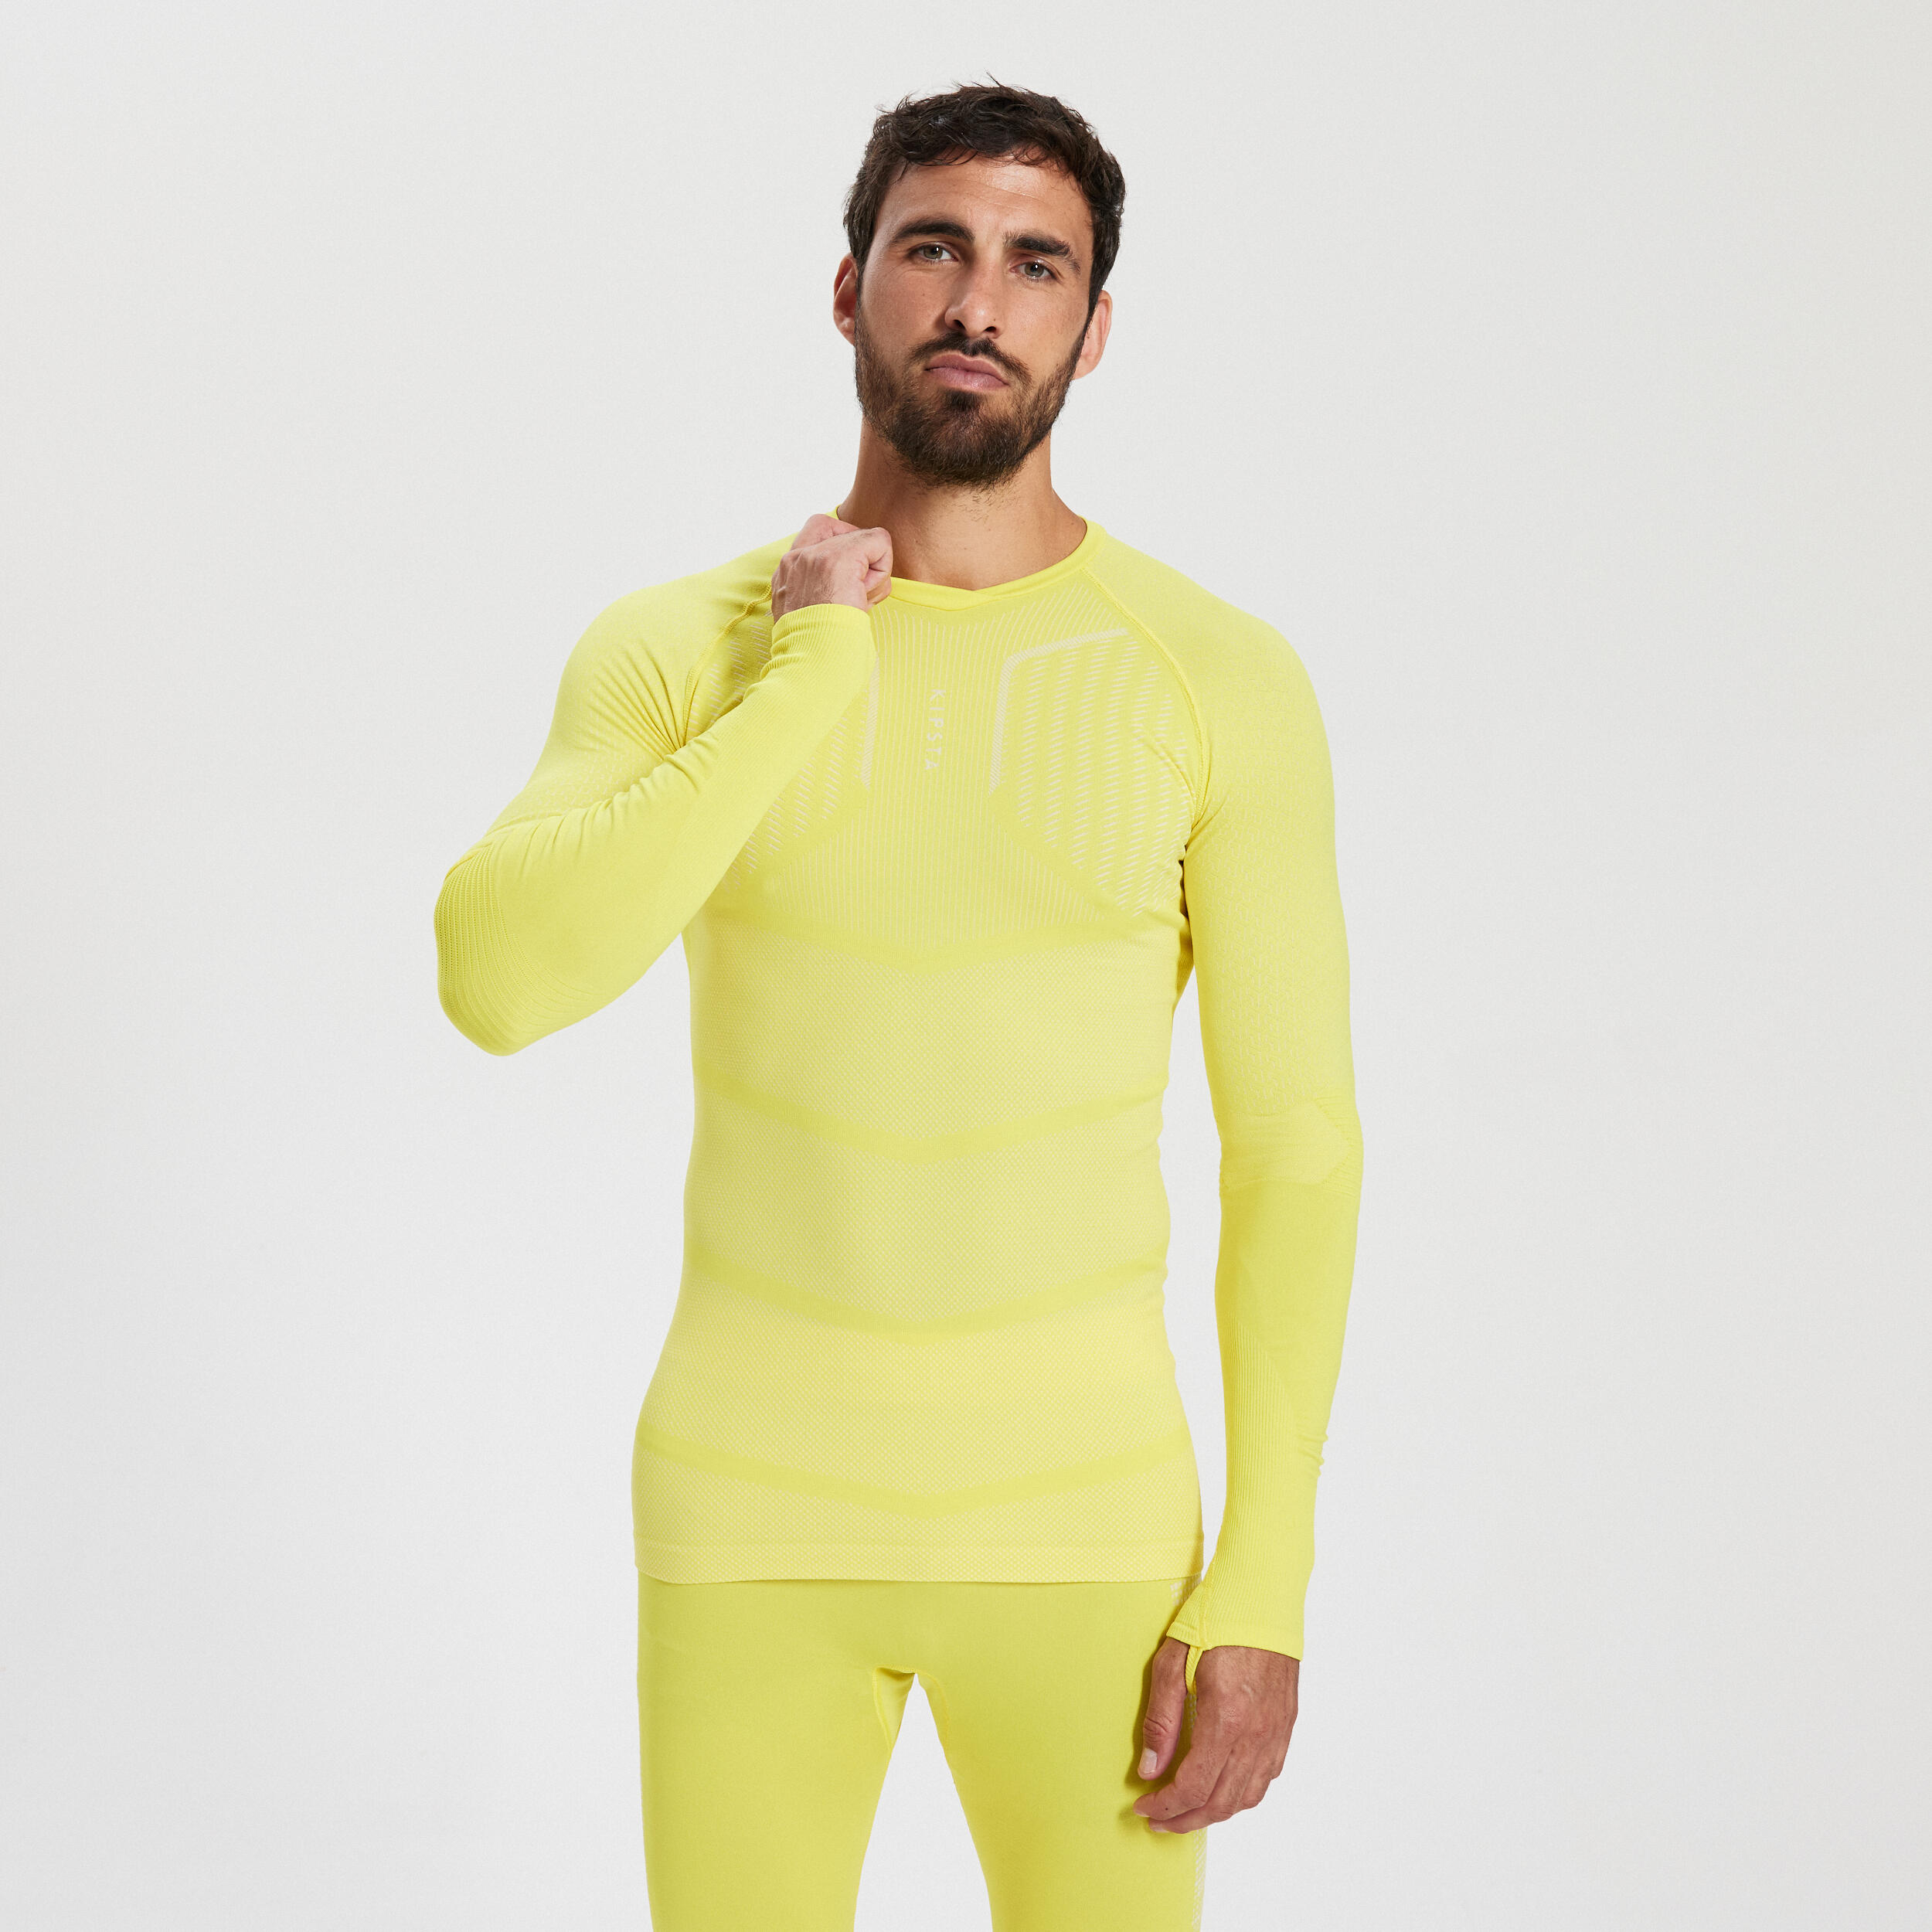 Adult Long-Sleeved Thermal Base Layer Top Keepdry 500 - Yellow 5/15